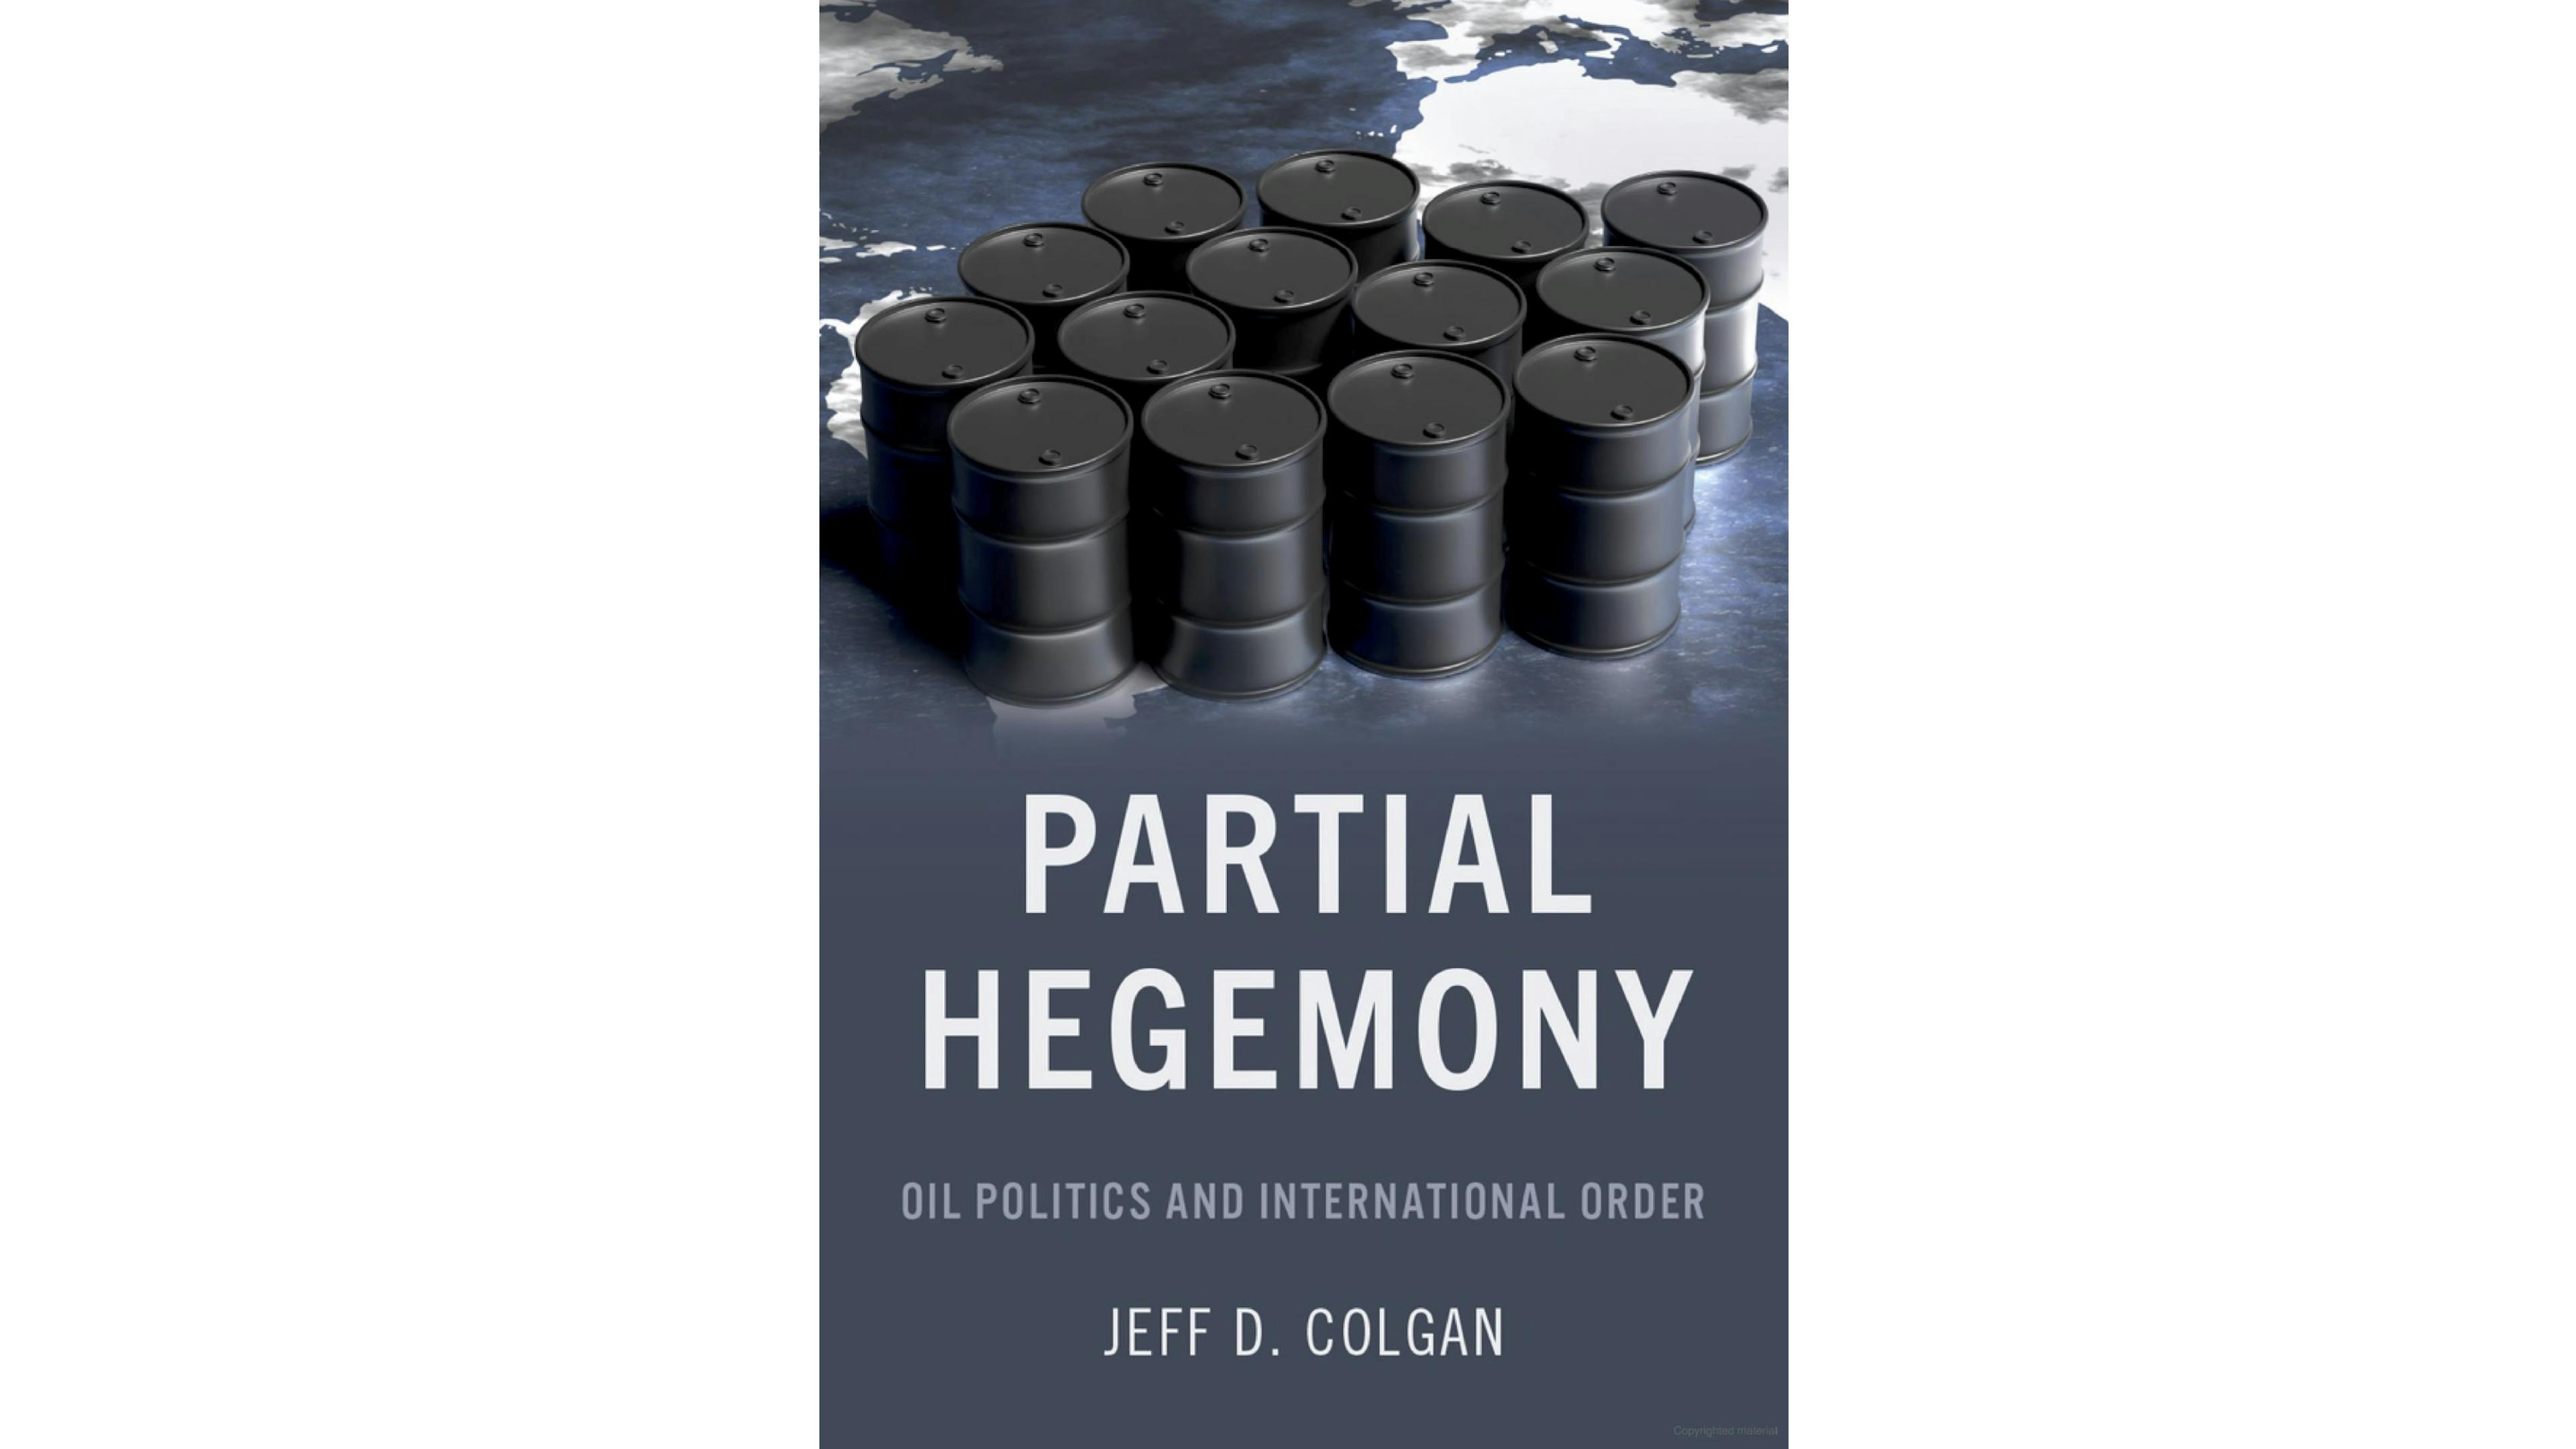 Partial Hegemony: Oil Politics and International Order by Jeff Colgan